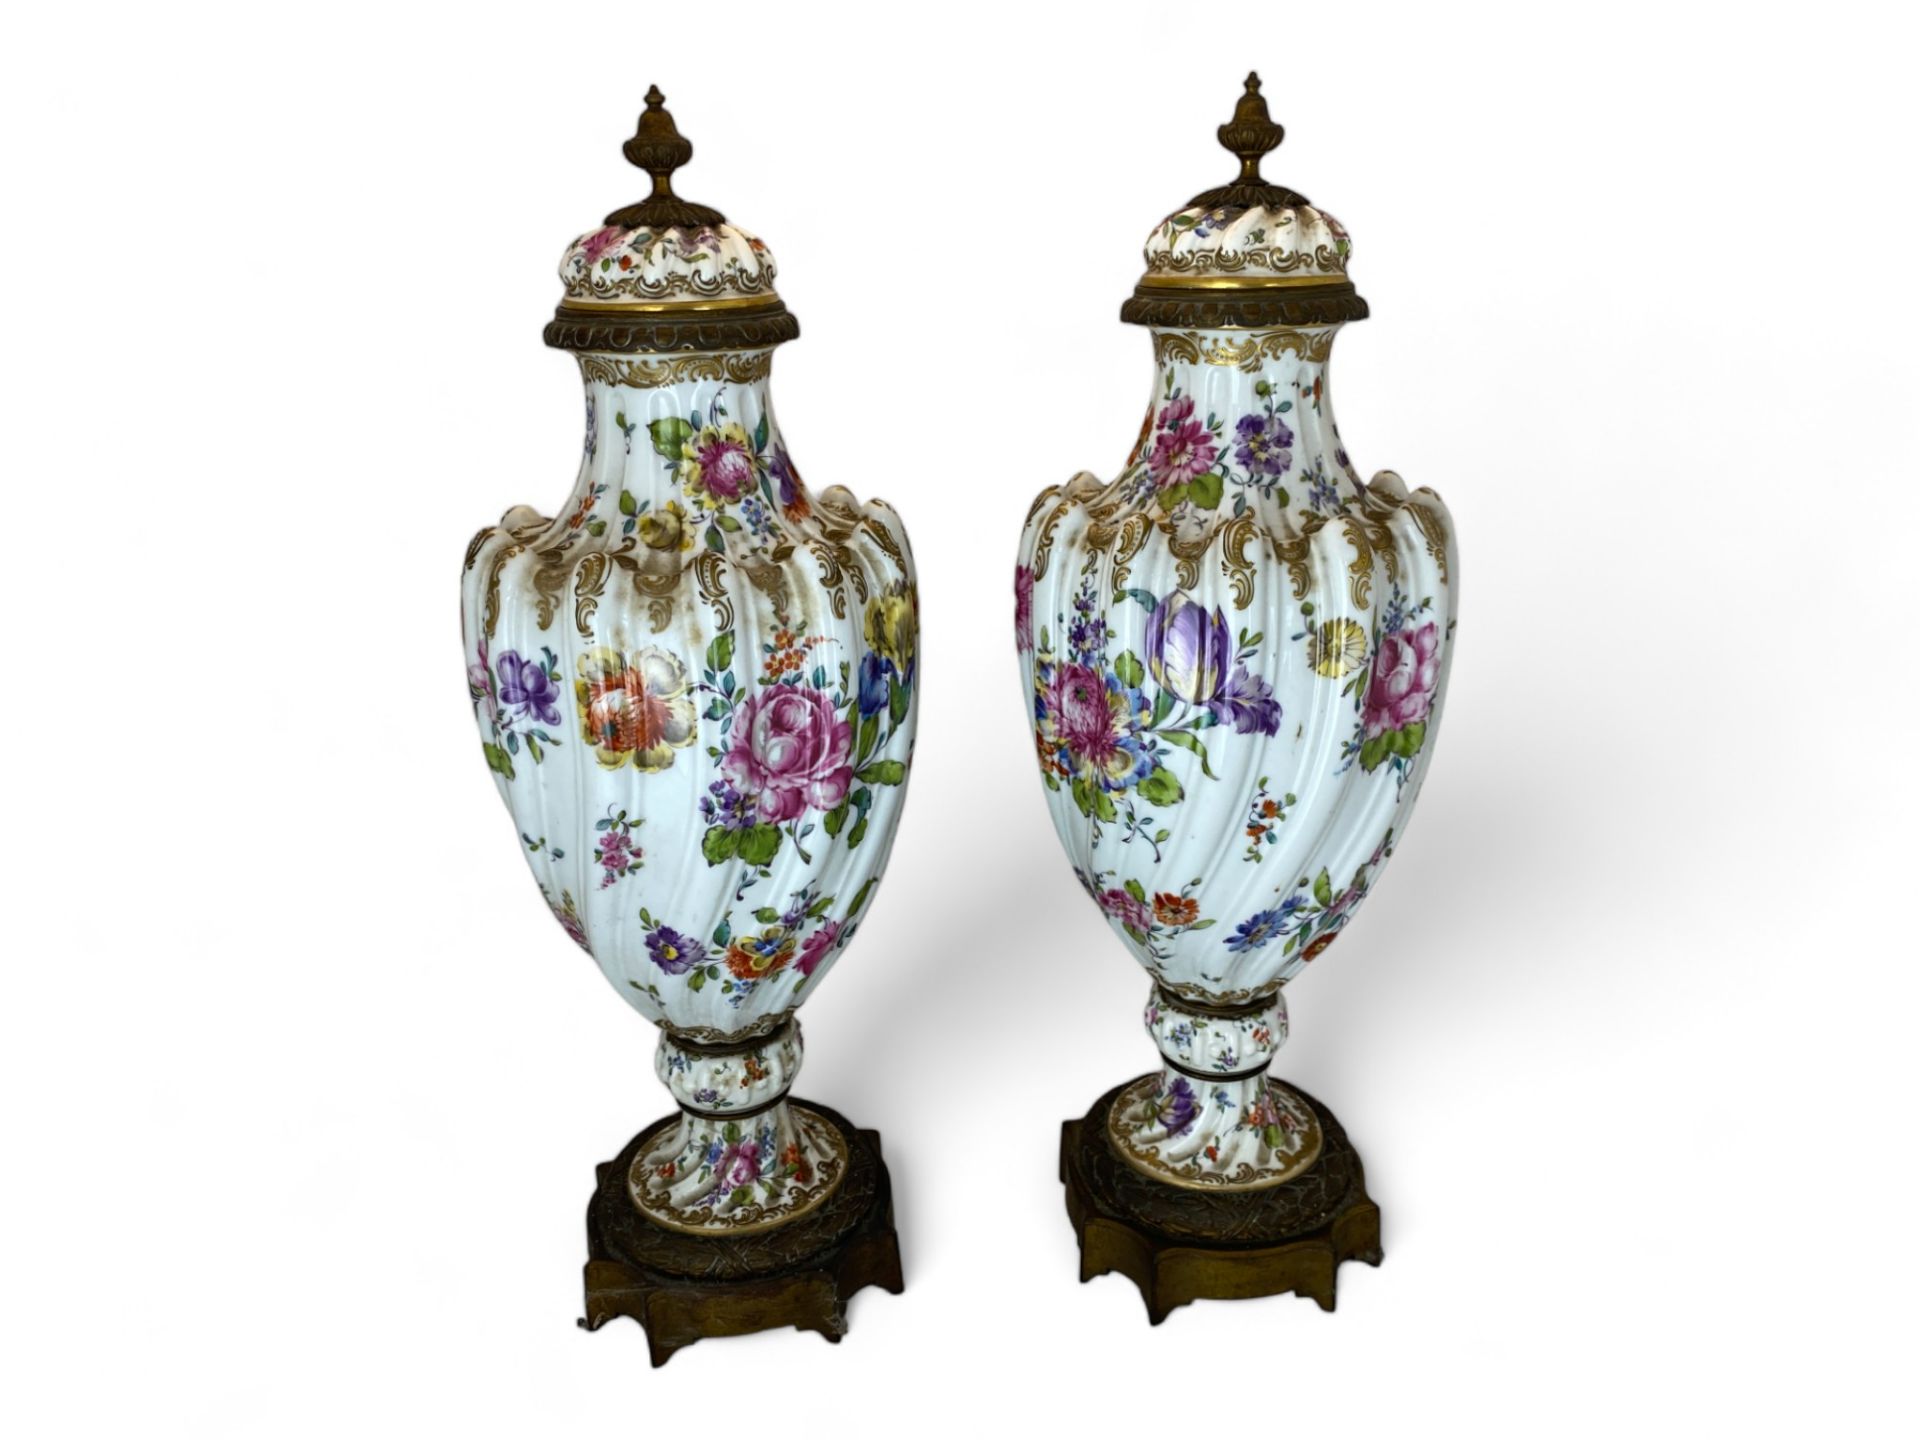 A pair of late 19th century Frankenthal gilt bronze mounted and floral decorated vases and c - Image 3 of 6